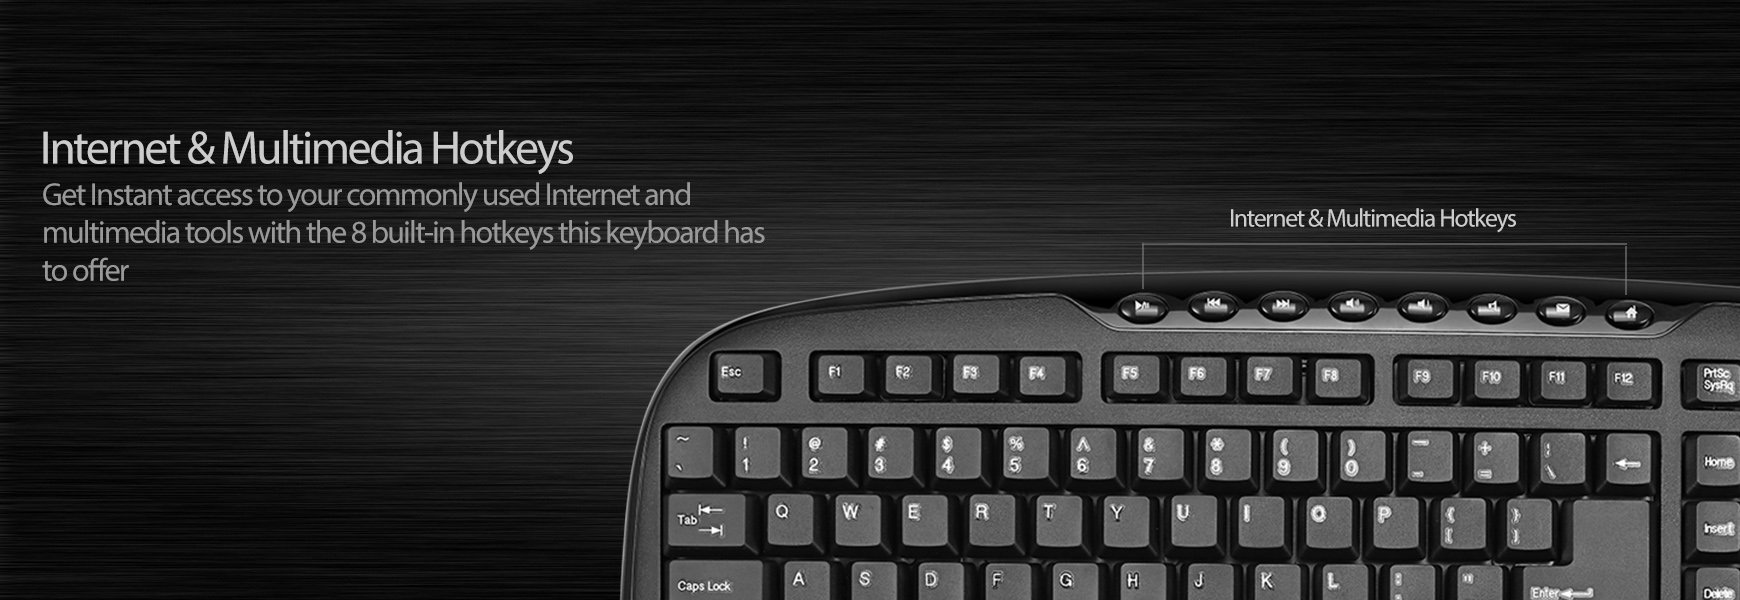 Adesso WKB-1330CB - Wireless Keyboard and Mouse Combo, Desktop Keyboard, Ambidextrous Mouse, Multimedia Hotkeys, Long Battery Life with USB Nano Receiver for Desktop/PC/Windows XP/7/8/10,Black